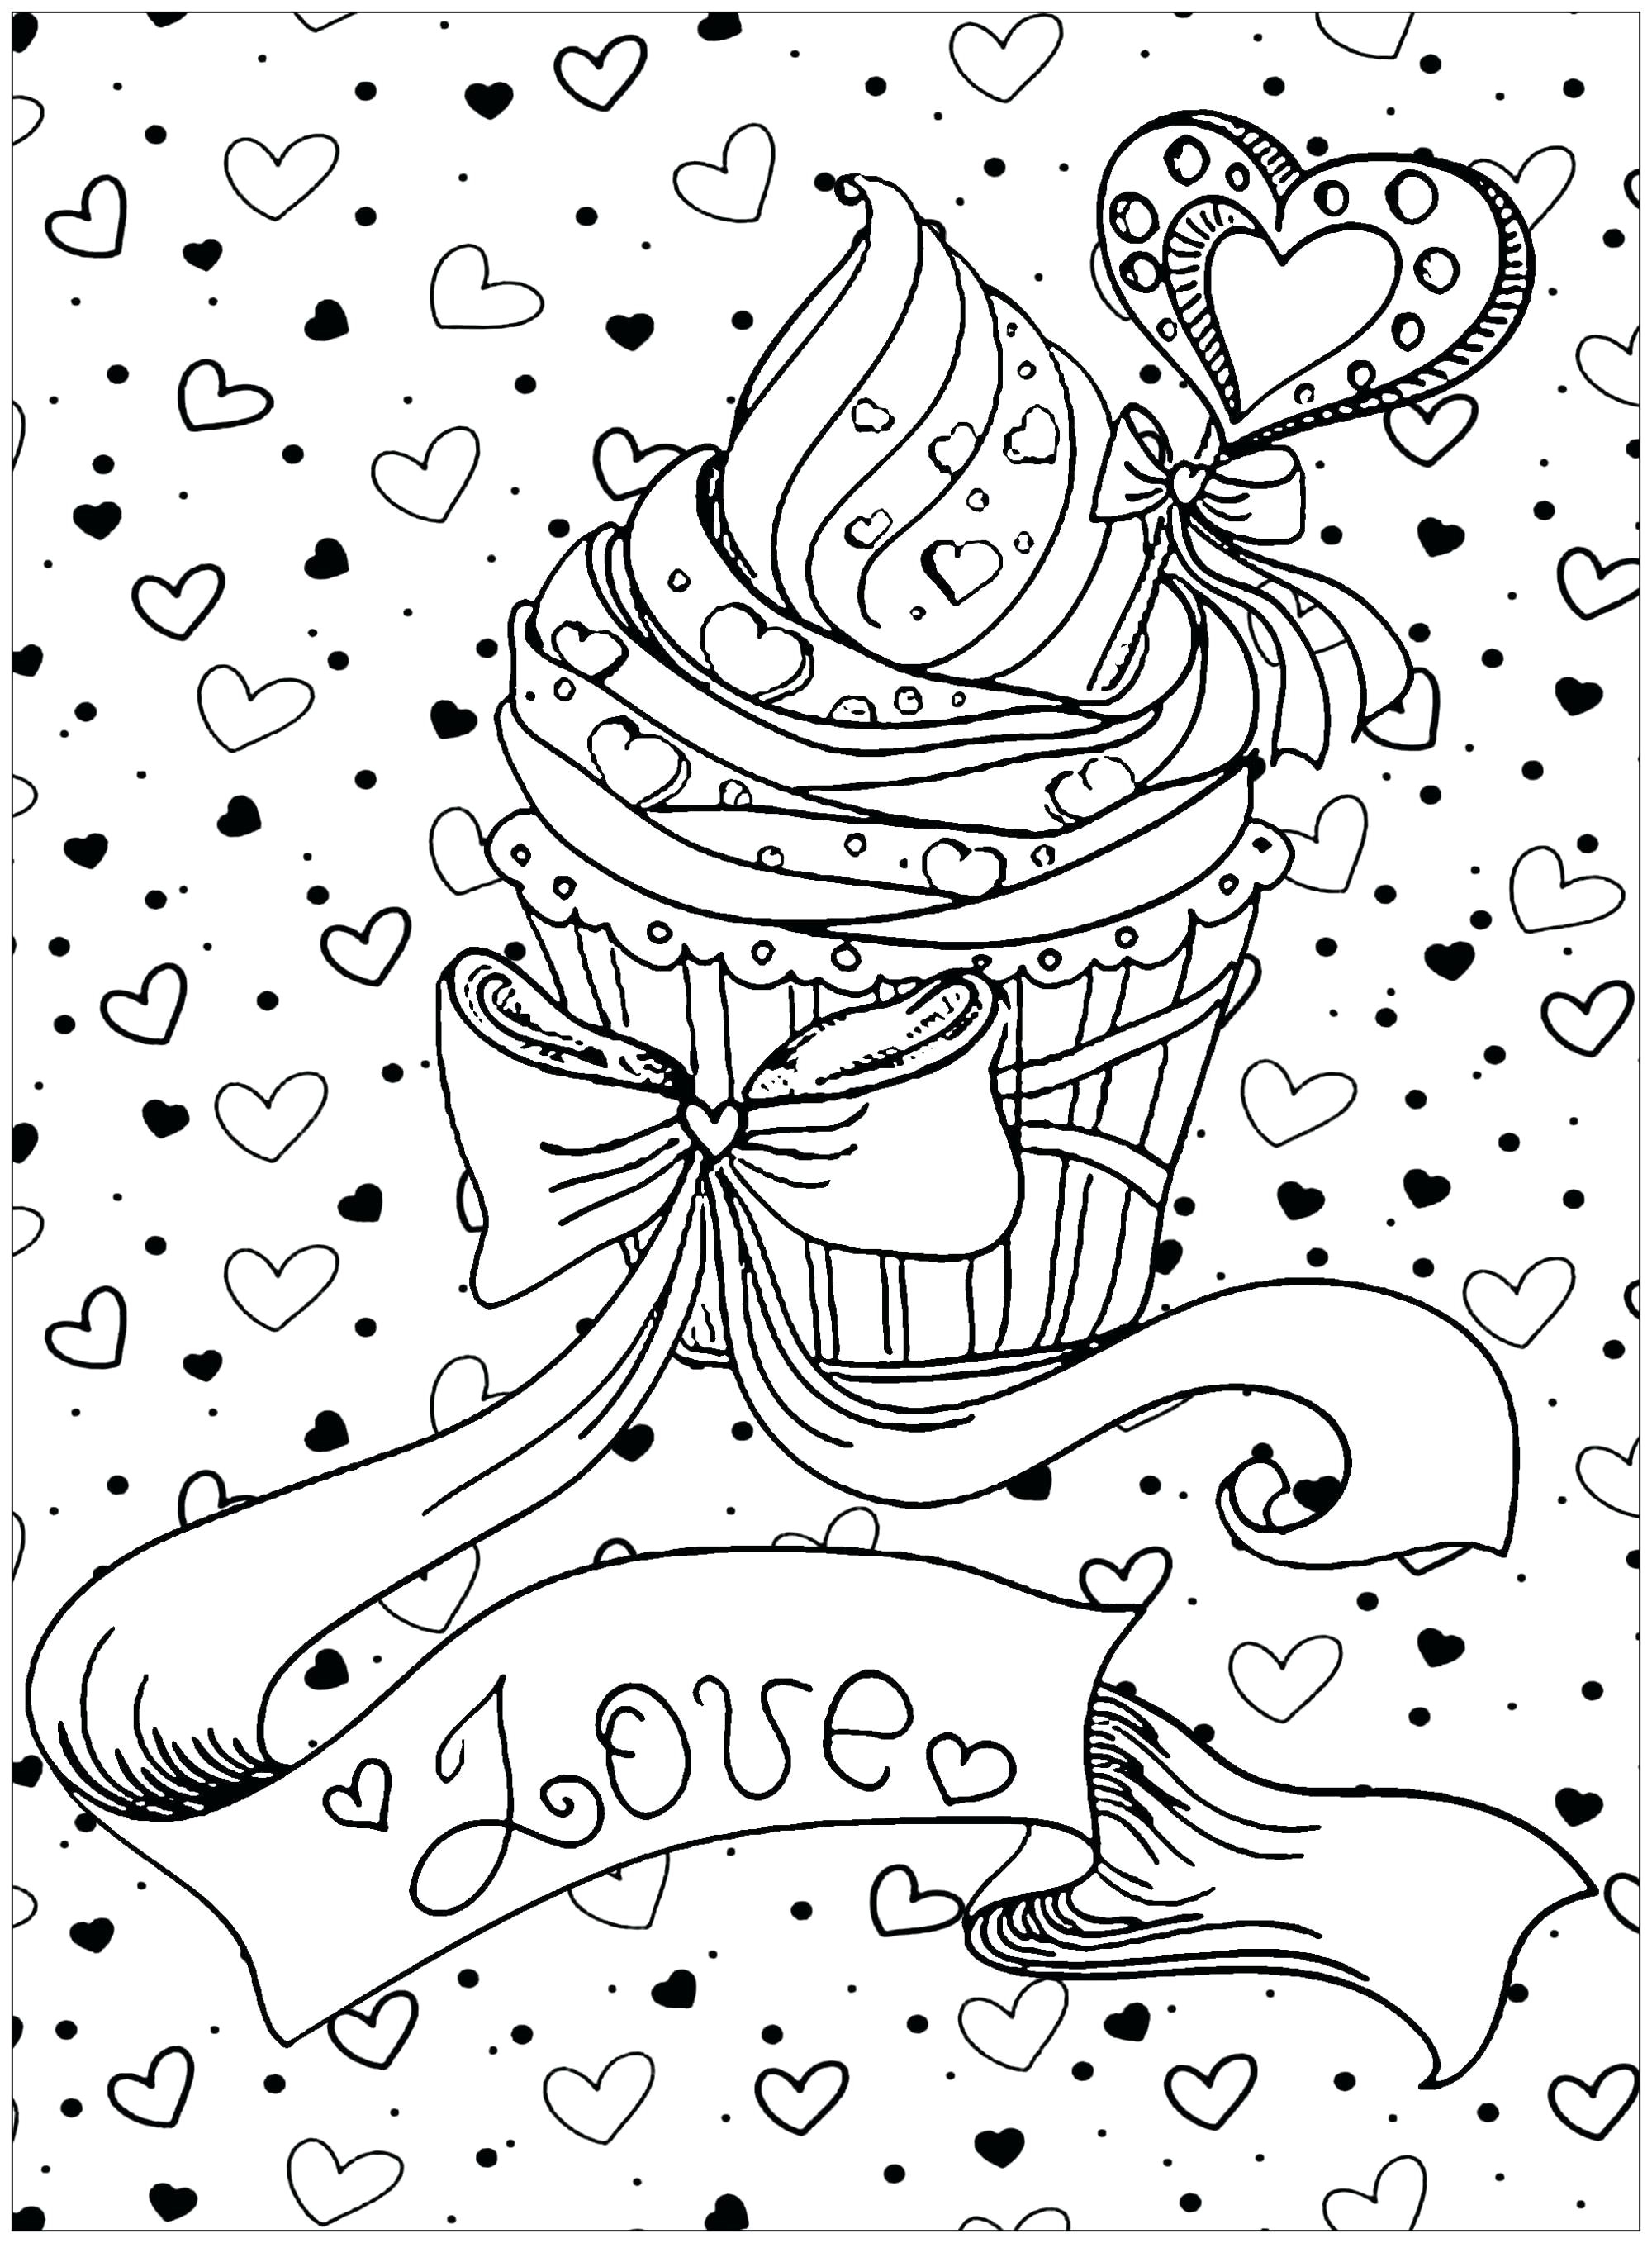 Customized Coloring Pages Custom Coloring Pages Fre Telematik Institut